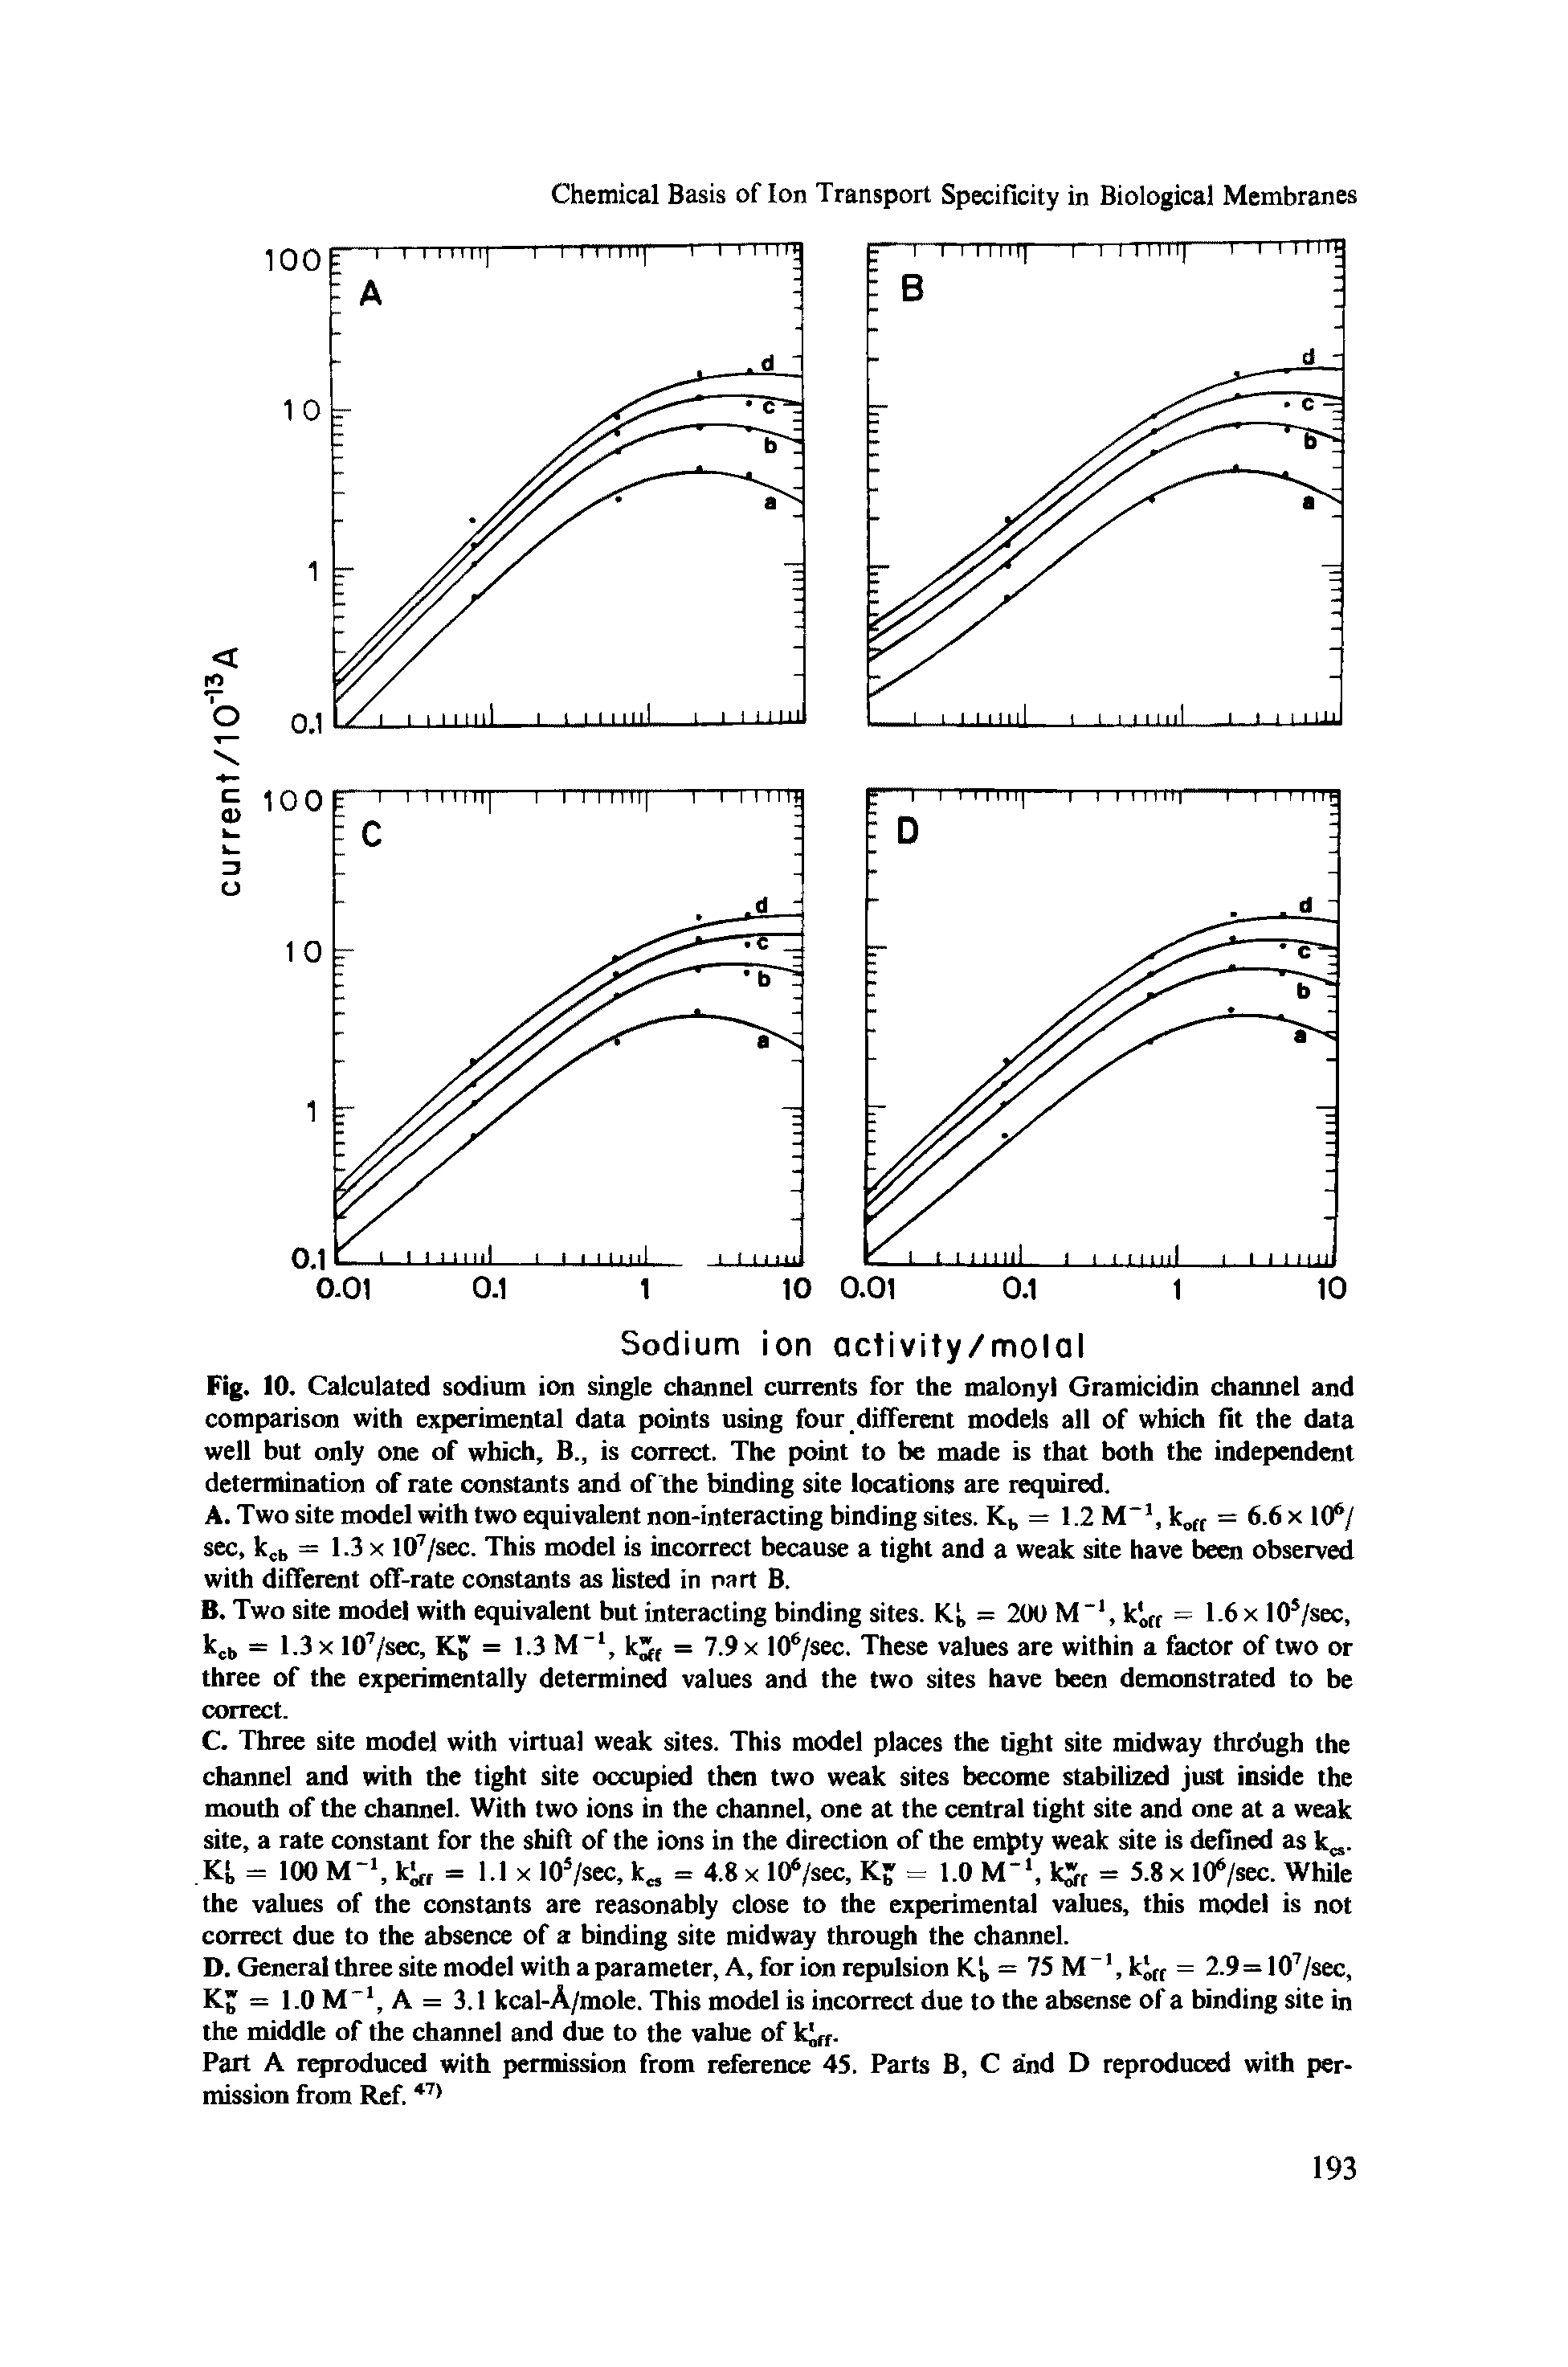 Fig. 10. Calculated sodium ion single channel currents for the malonyl Gramicidin channel and comparison with experimental data points using four different models all of which fit the data well but only one of which, B., is correct. The point to be made is that both the independent determination of rate constants and of the binding site locations are required.